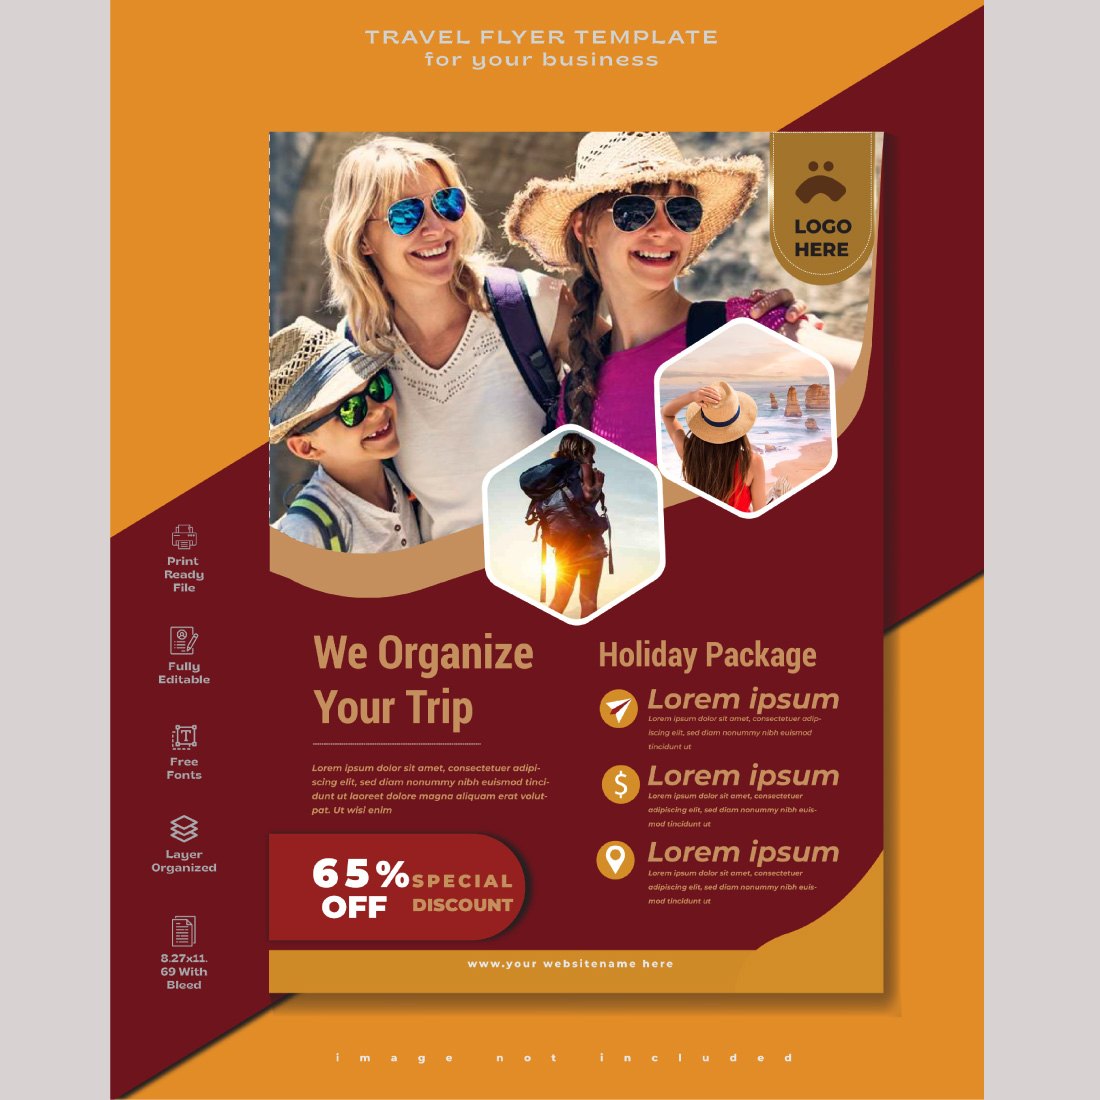 Travel flyer templatetravel tour flyer template for your business travel flyer design cover image.